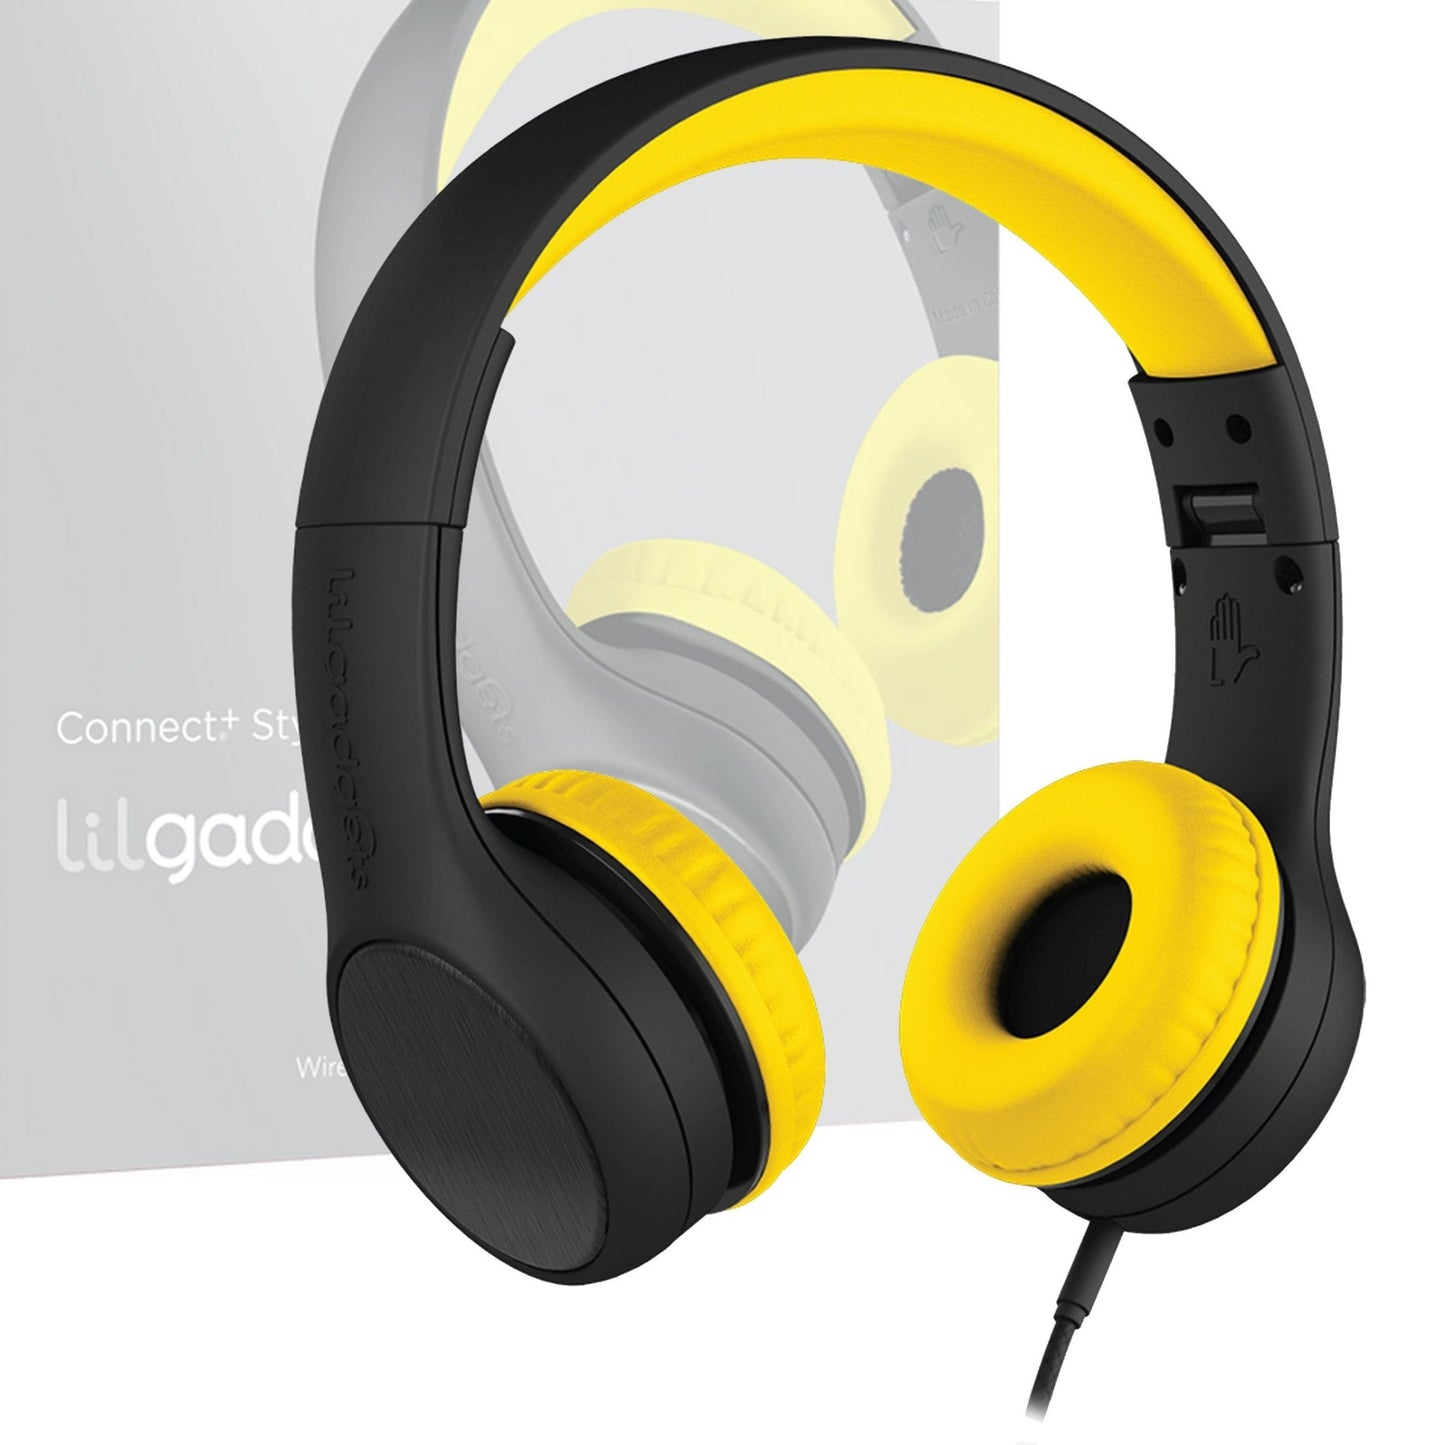 LilGadgets Connect + Childrens Kids Wired Headphones Black Yellow - Little Kids Business